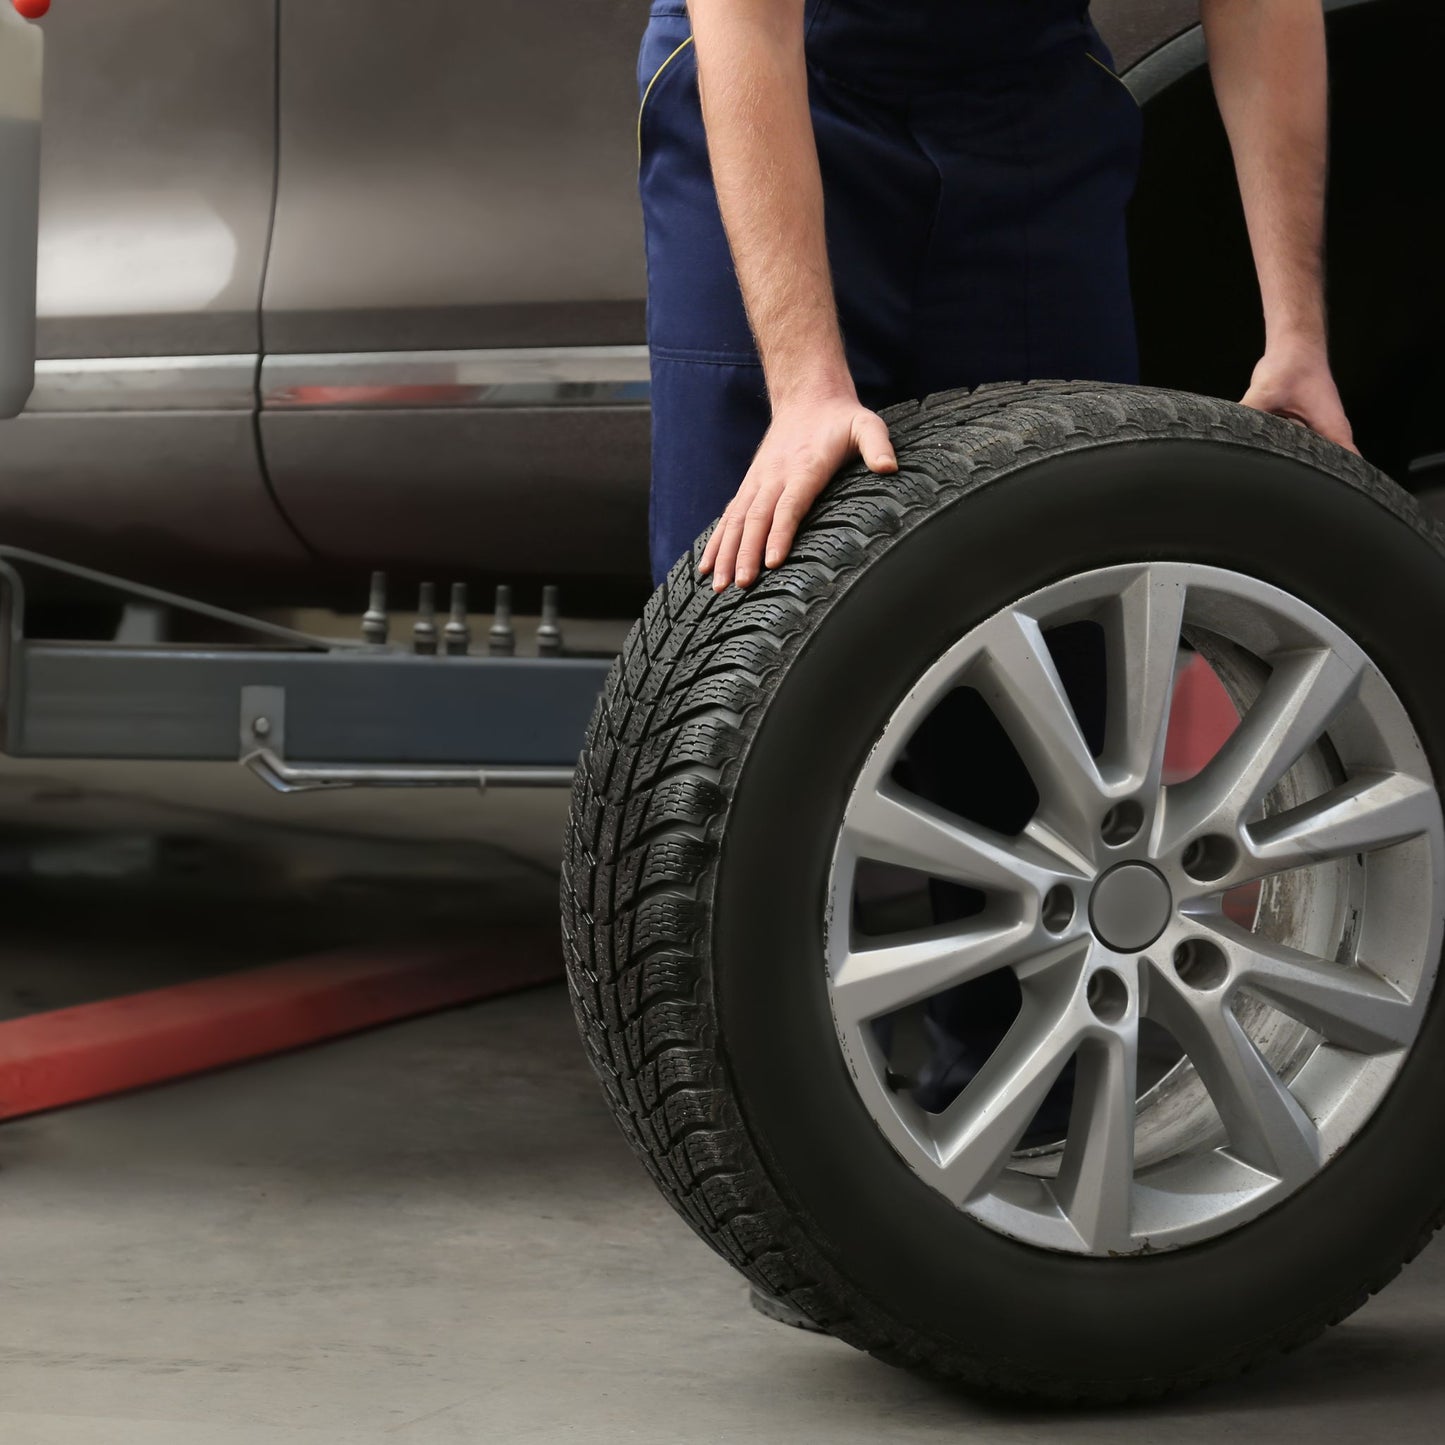 Mobile tire rotation service Whitby, Ontario.